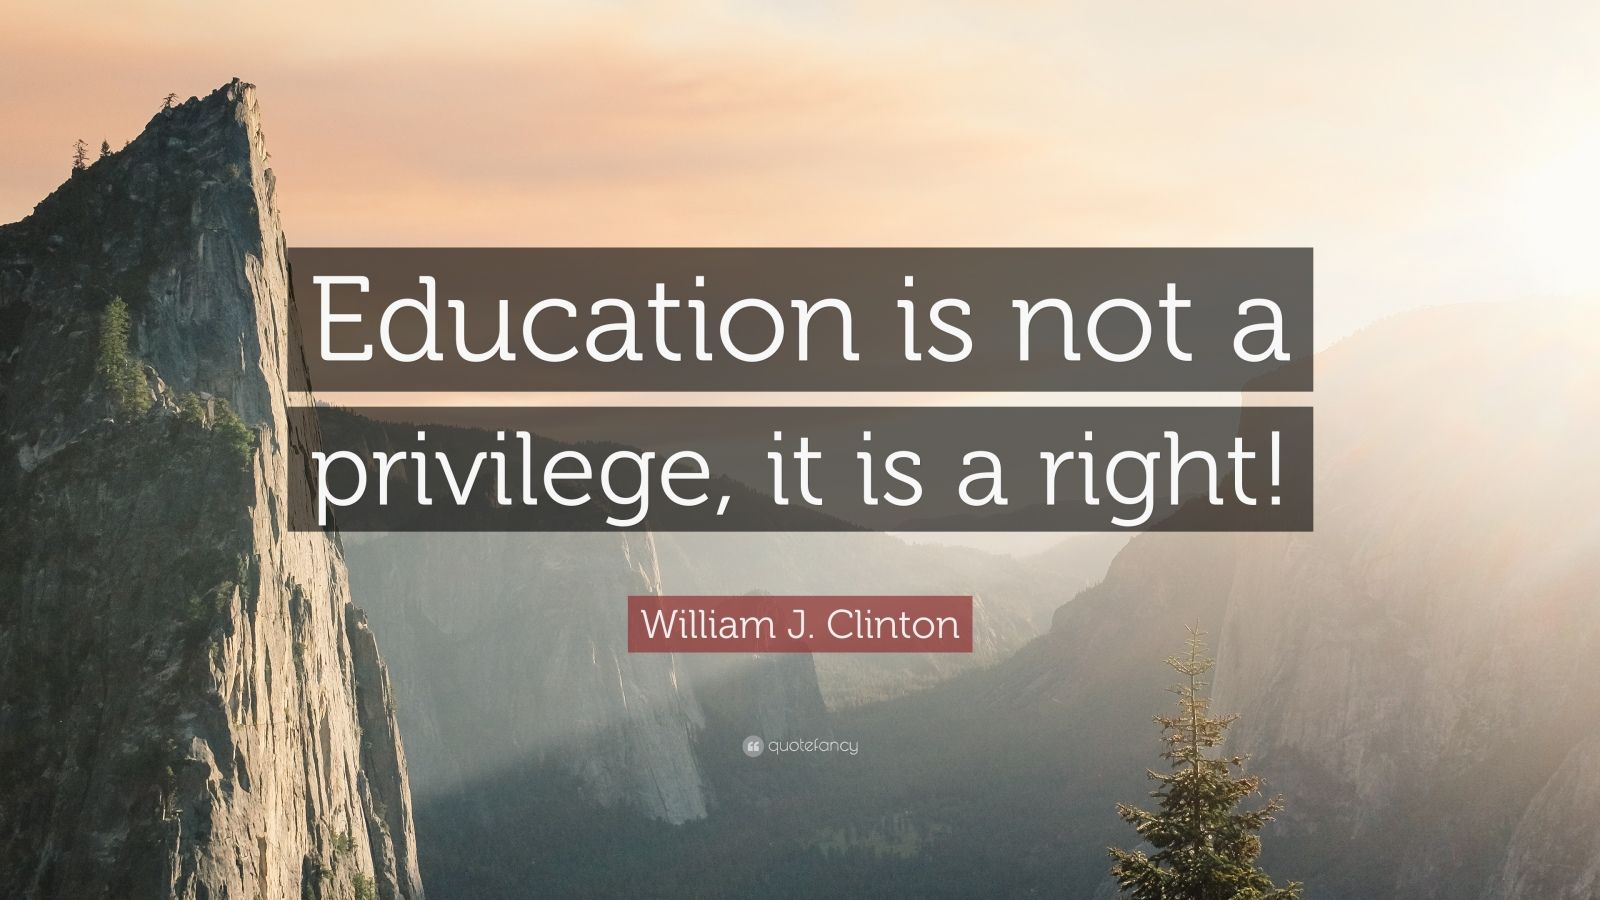 William J. Clinton Quote: “Education is not a privilege, it is a right!”